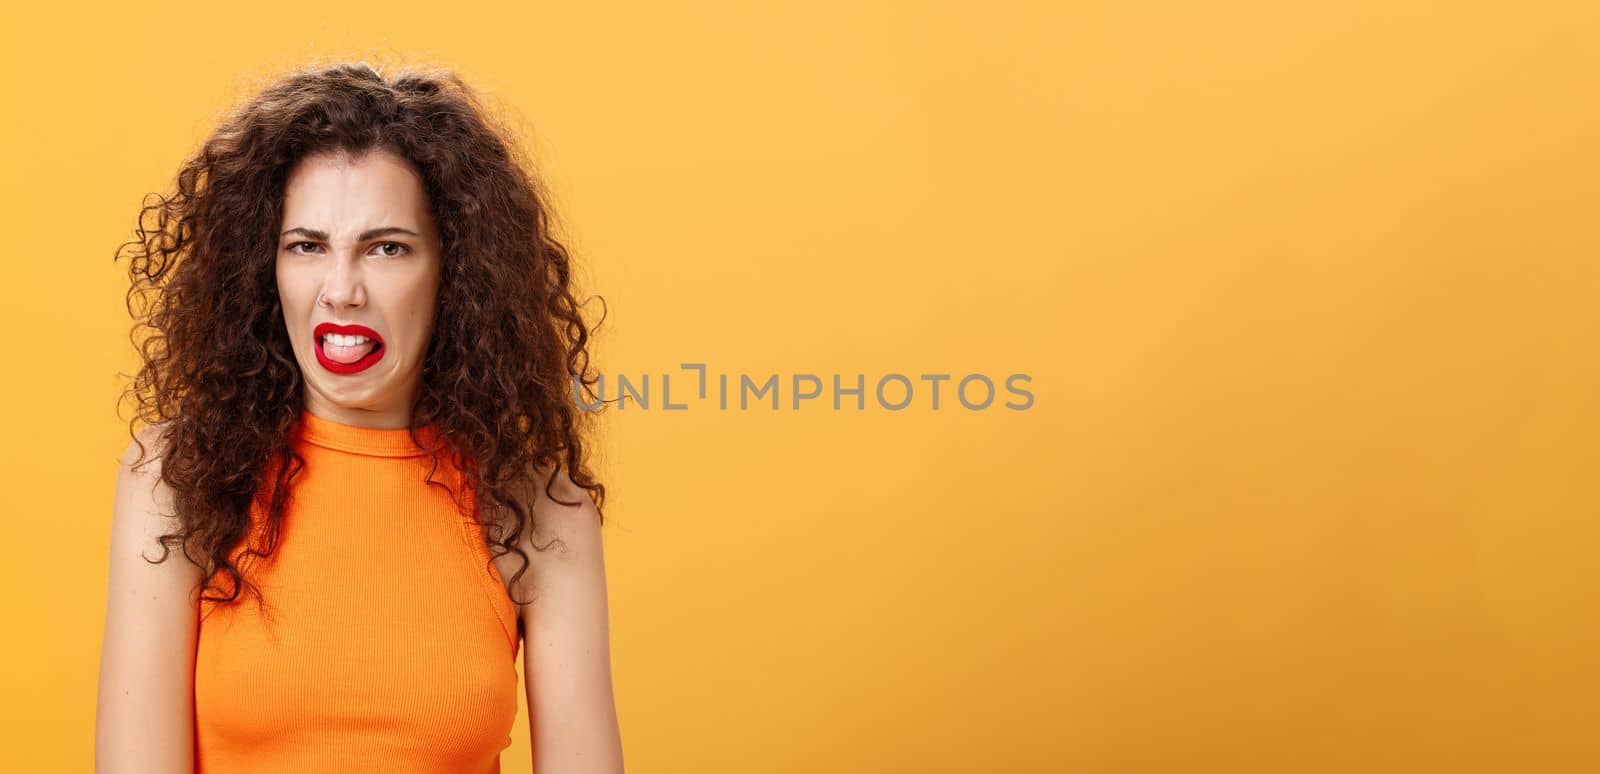 Girl being disgusted with row food sticking out tongue and frowning showing aversion and disgust talking about thing she dislikes with friend standing intense and dissatisfied over orange background. Copy space